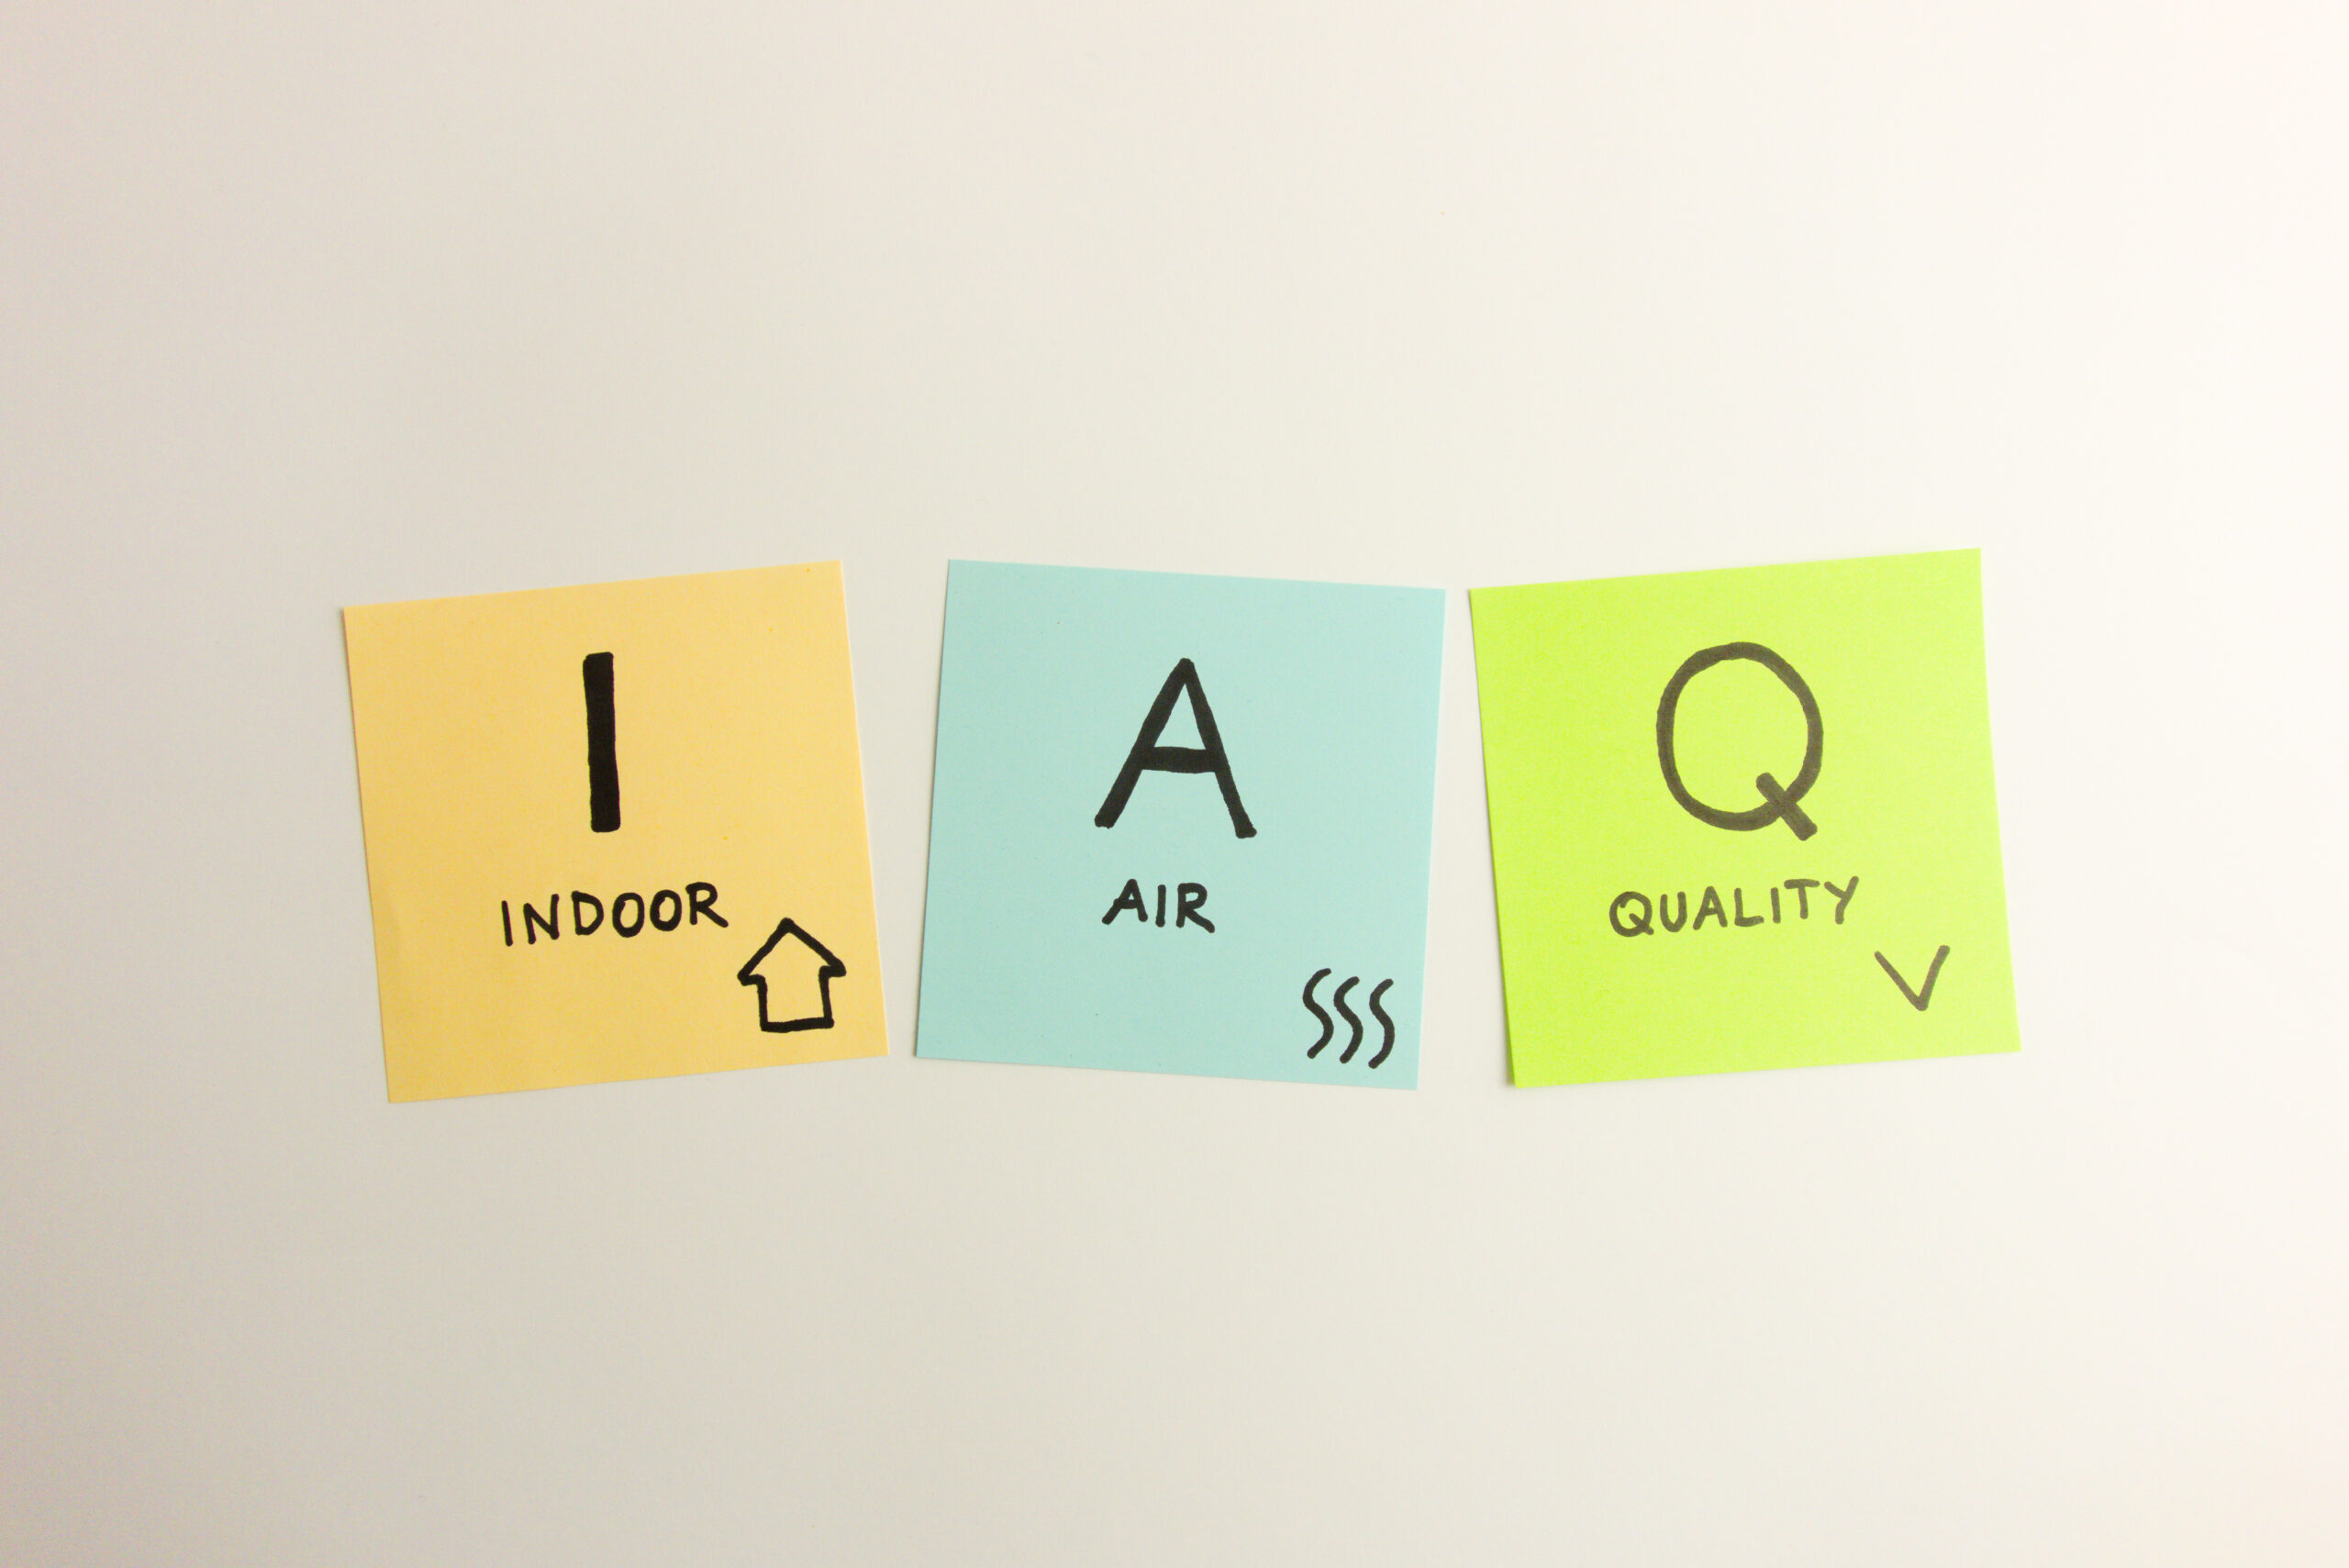 indoor air quality "IAQ" acronym handwritten on sticky notes in black marker isolated on white background